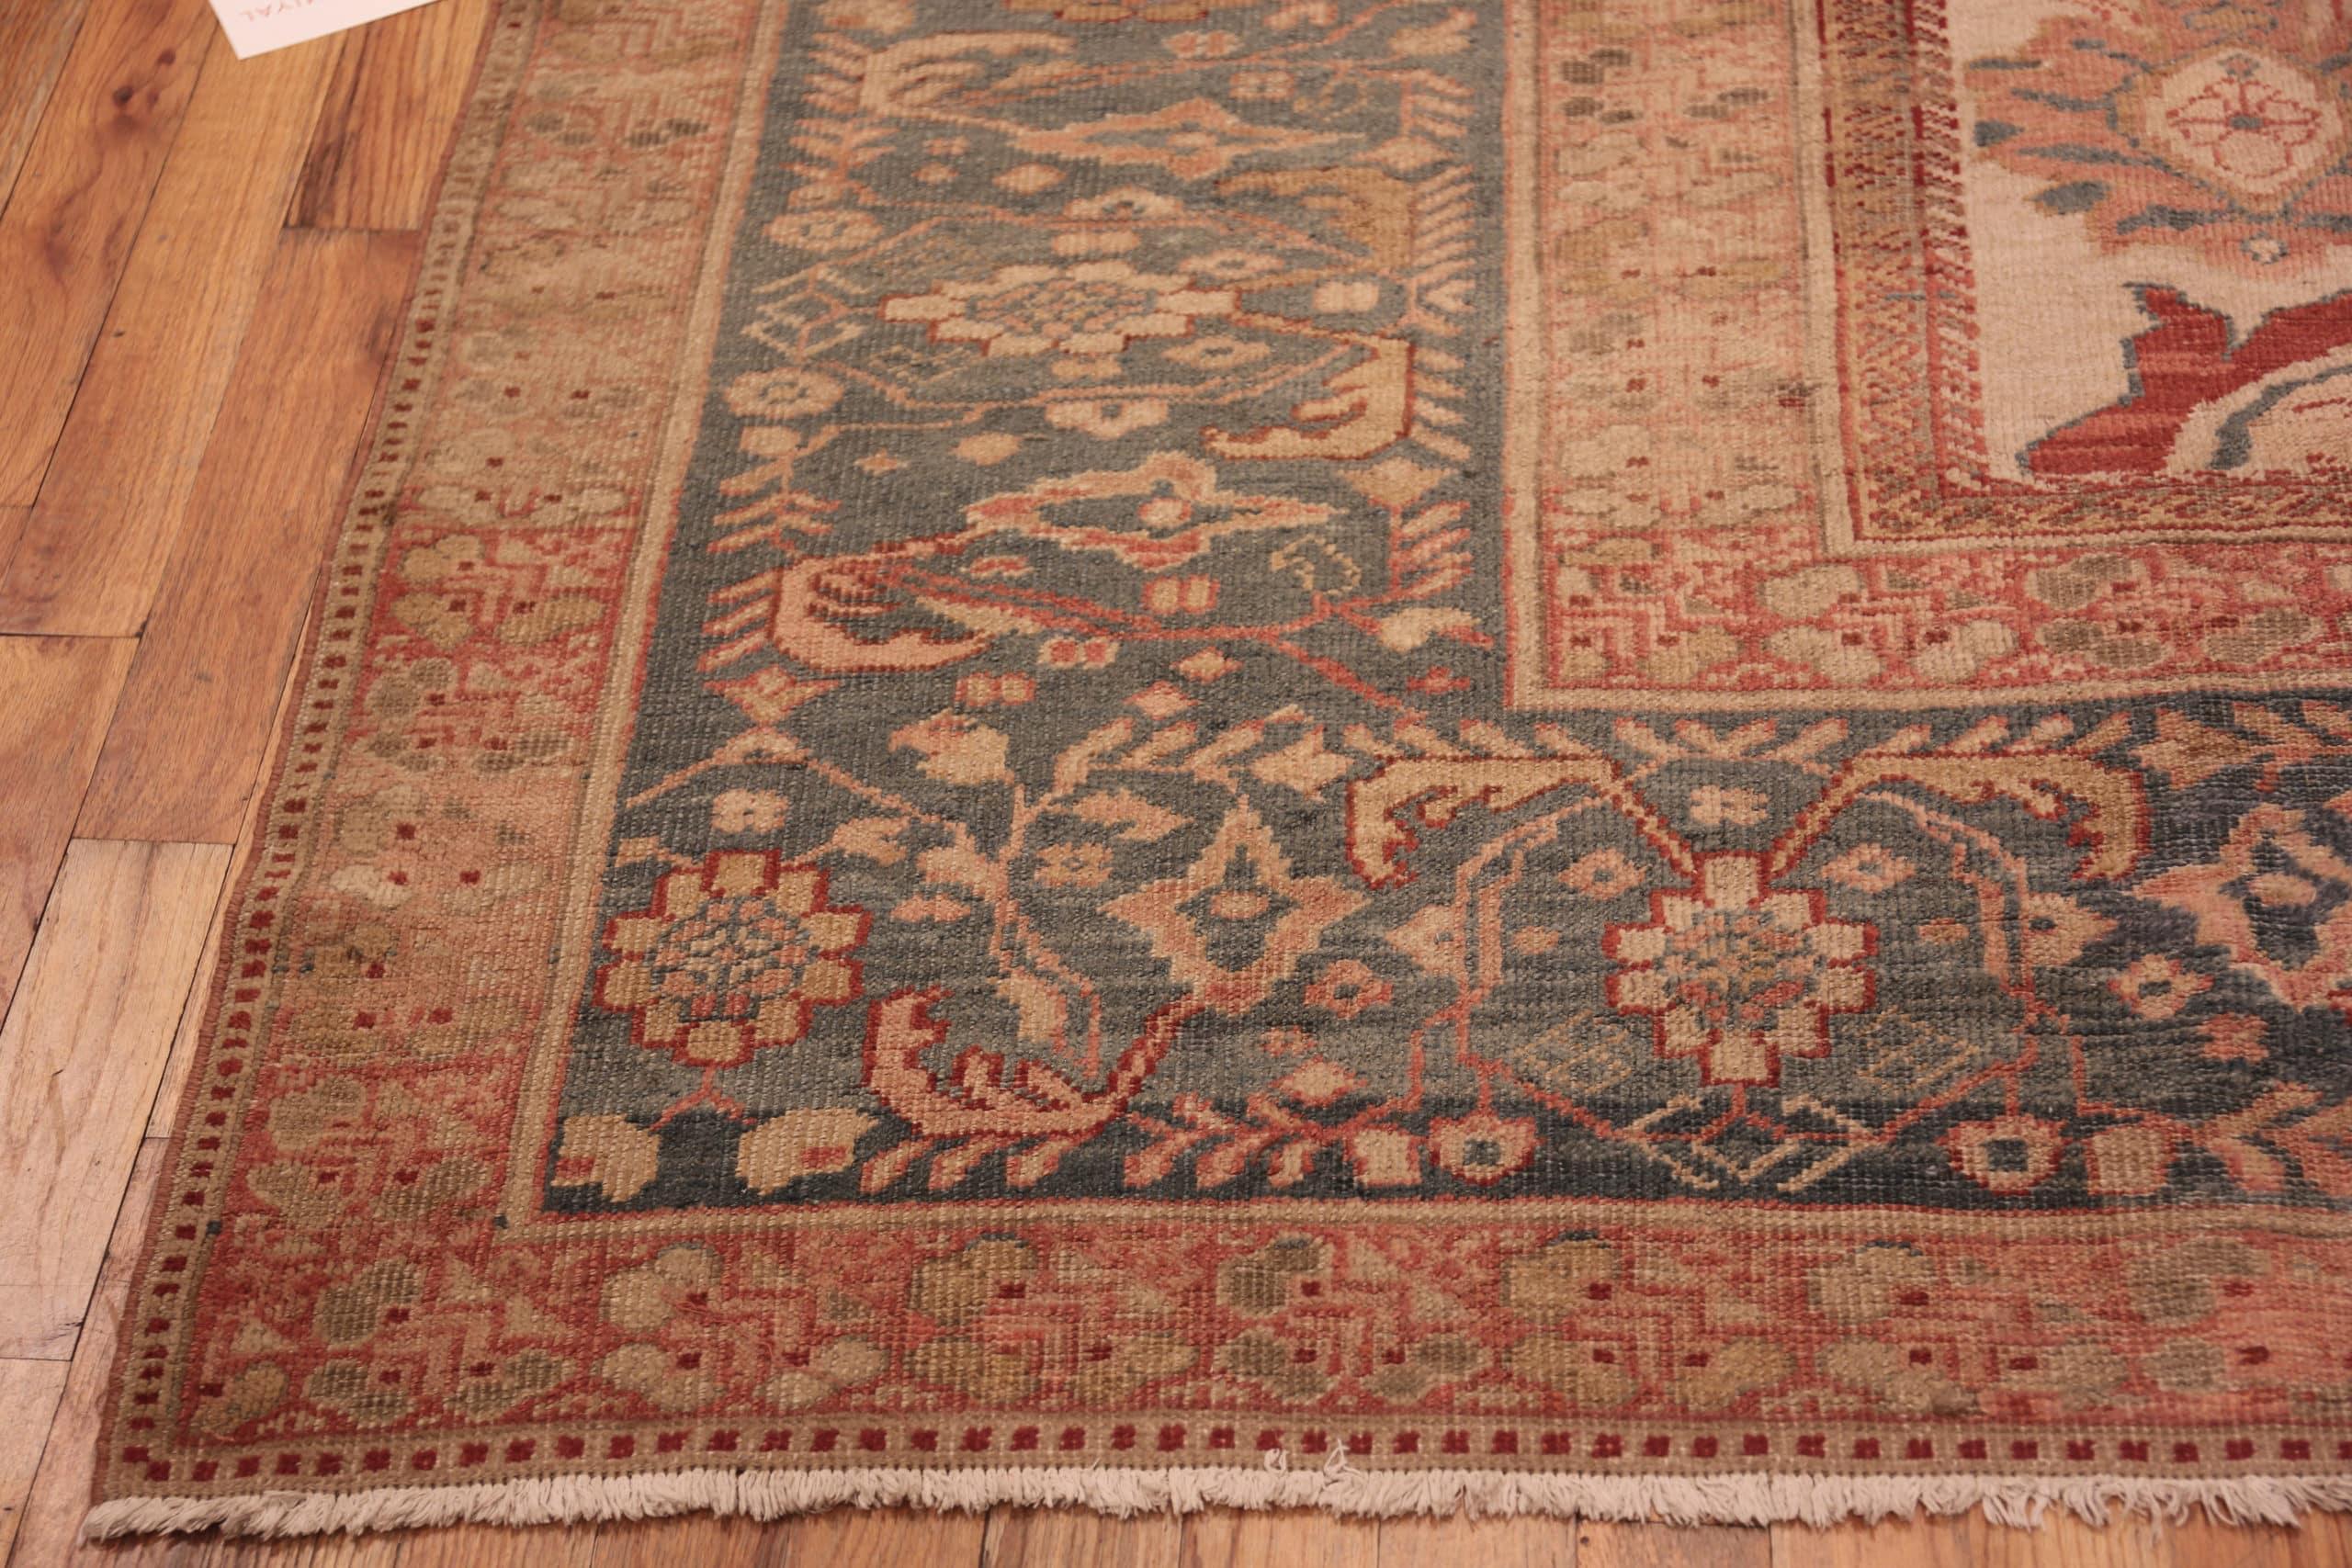 Hand-Knotted Nazmiyal Antique Ziegler Sultanabad Persian Rug. 10 ft 10 in x 17 ft 6 in